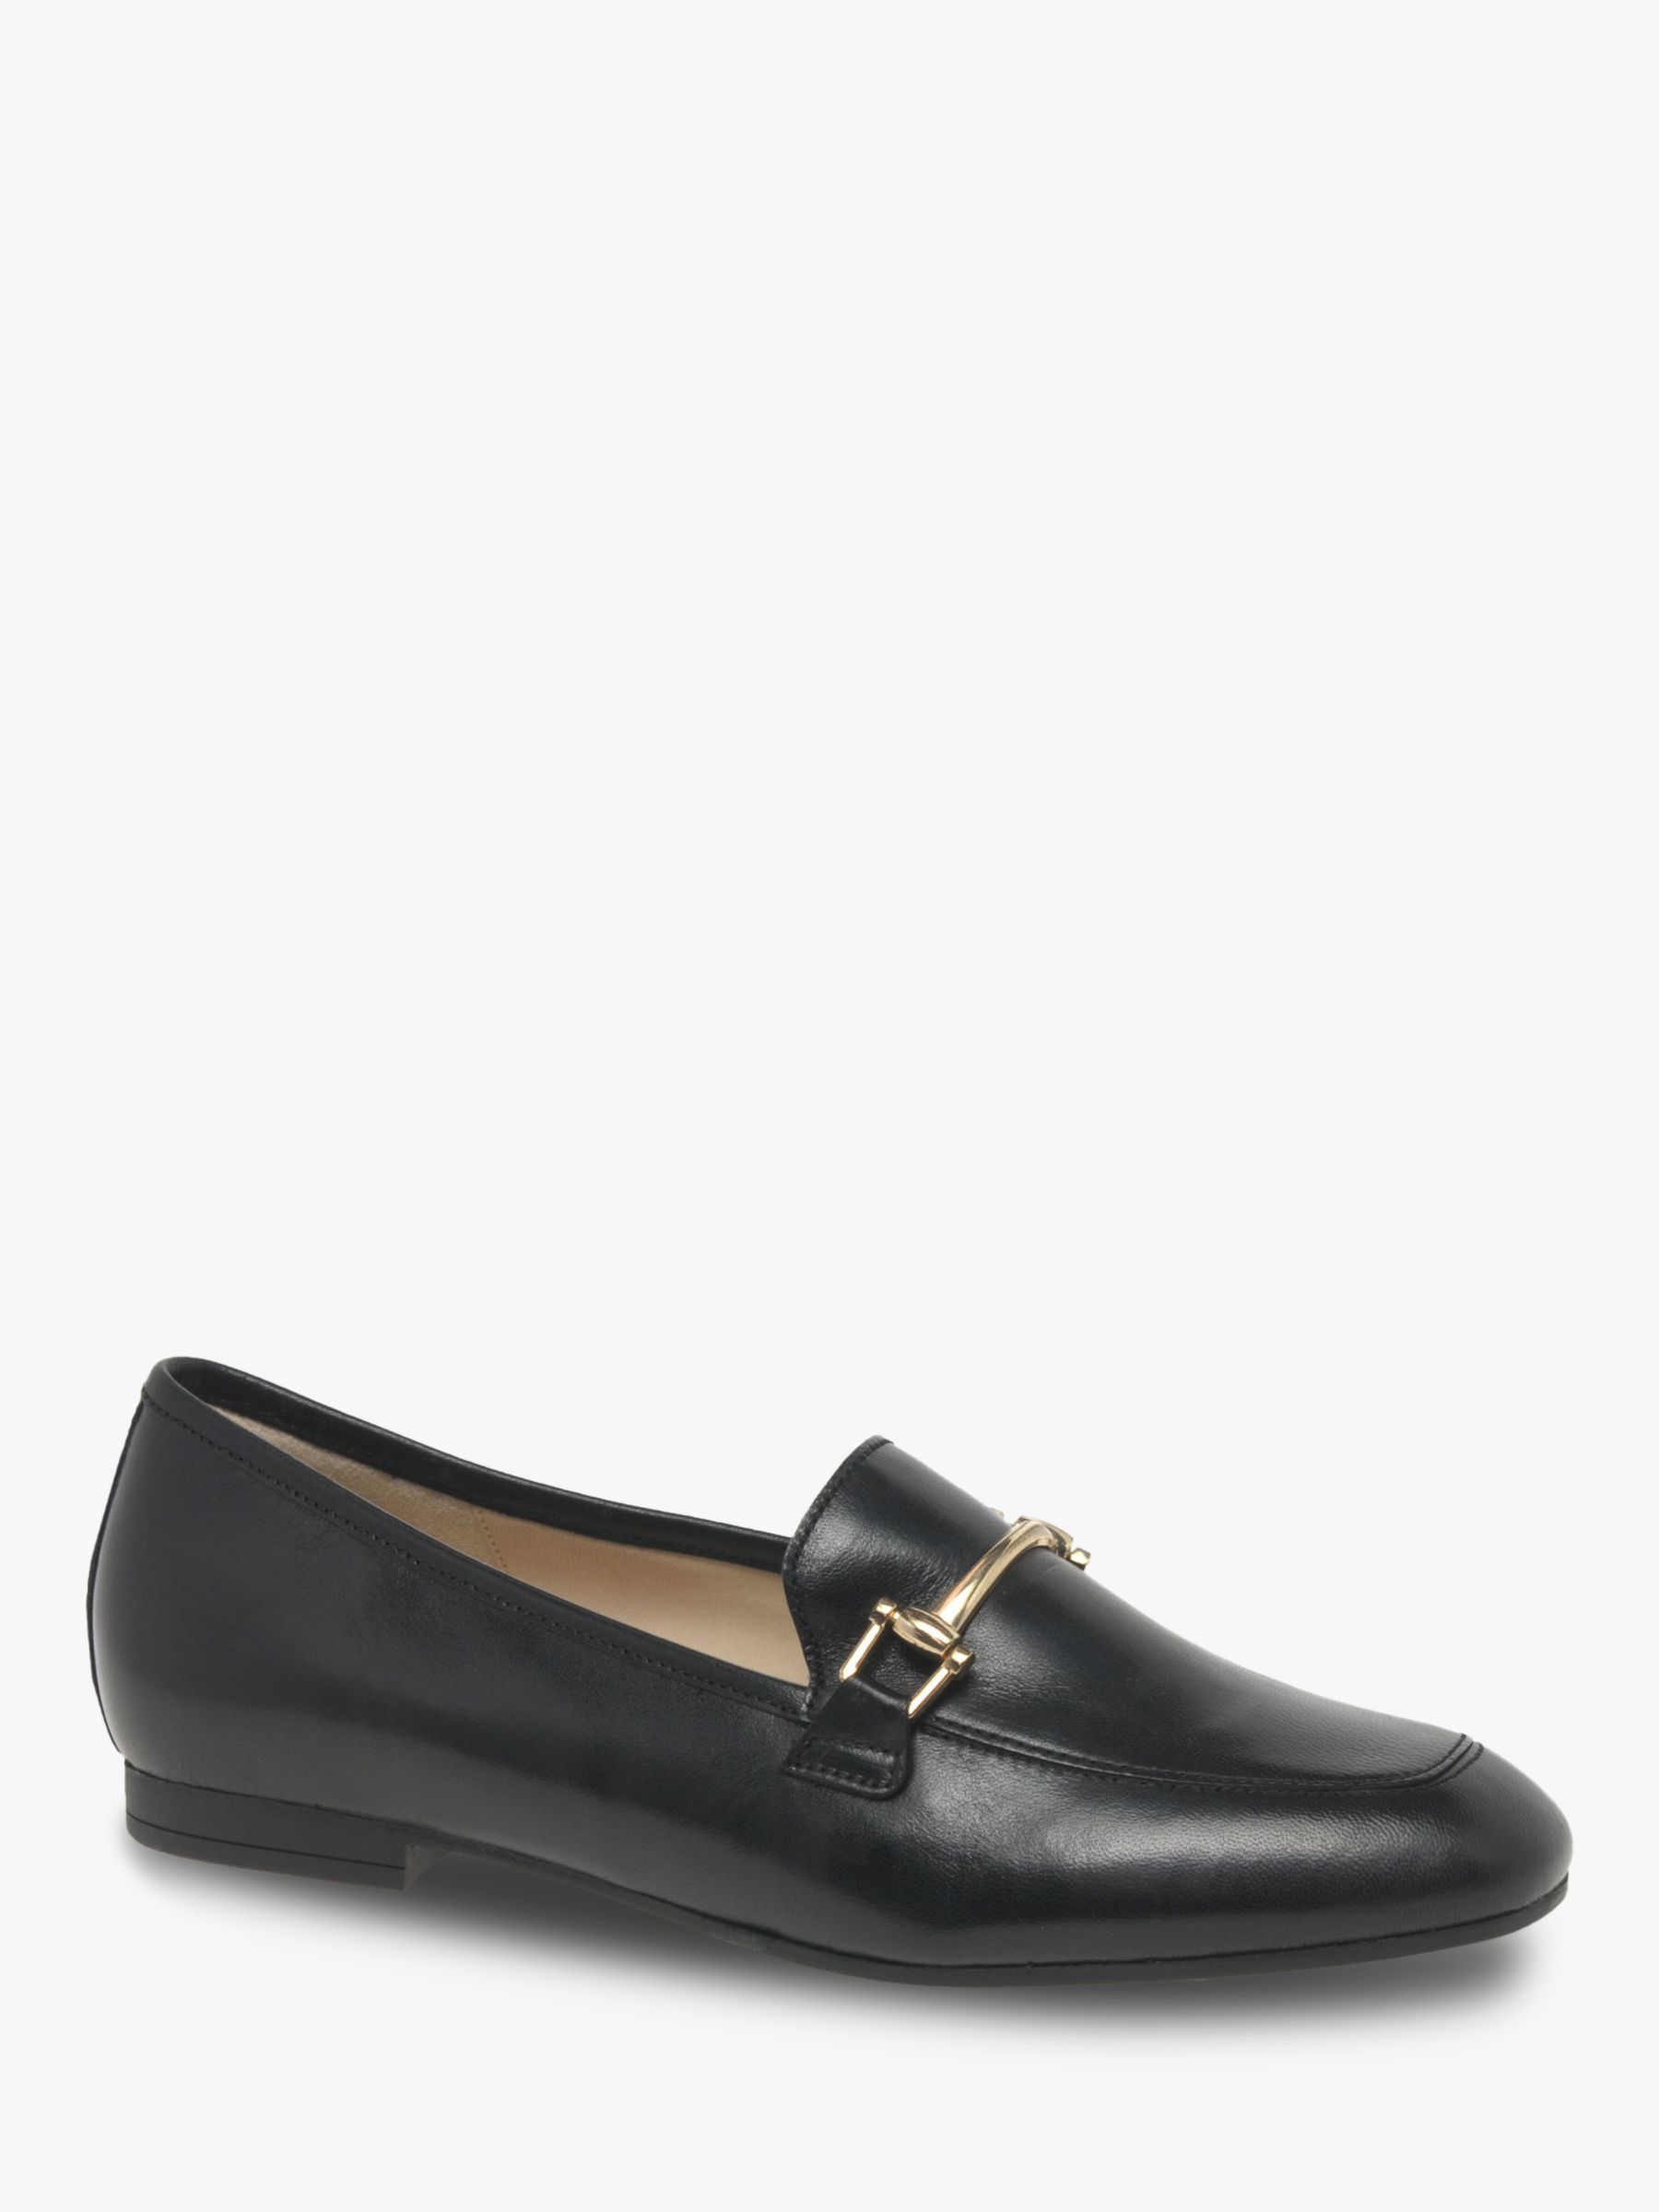 Gabor Serin Leather Gold Trim Loafers, Black at John Lewis & Partners